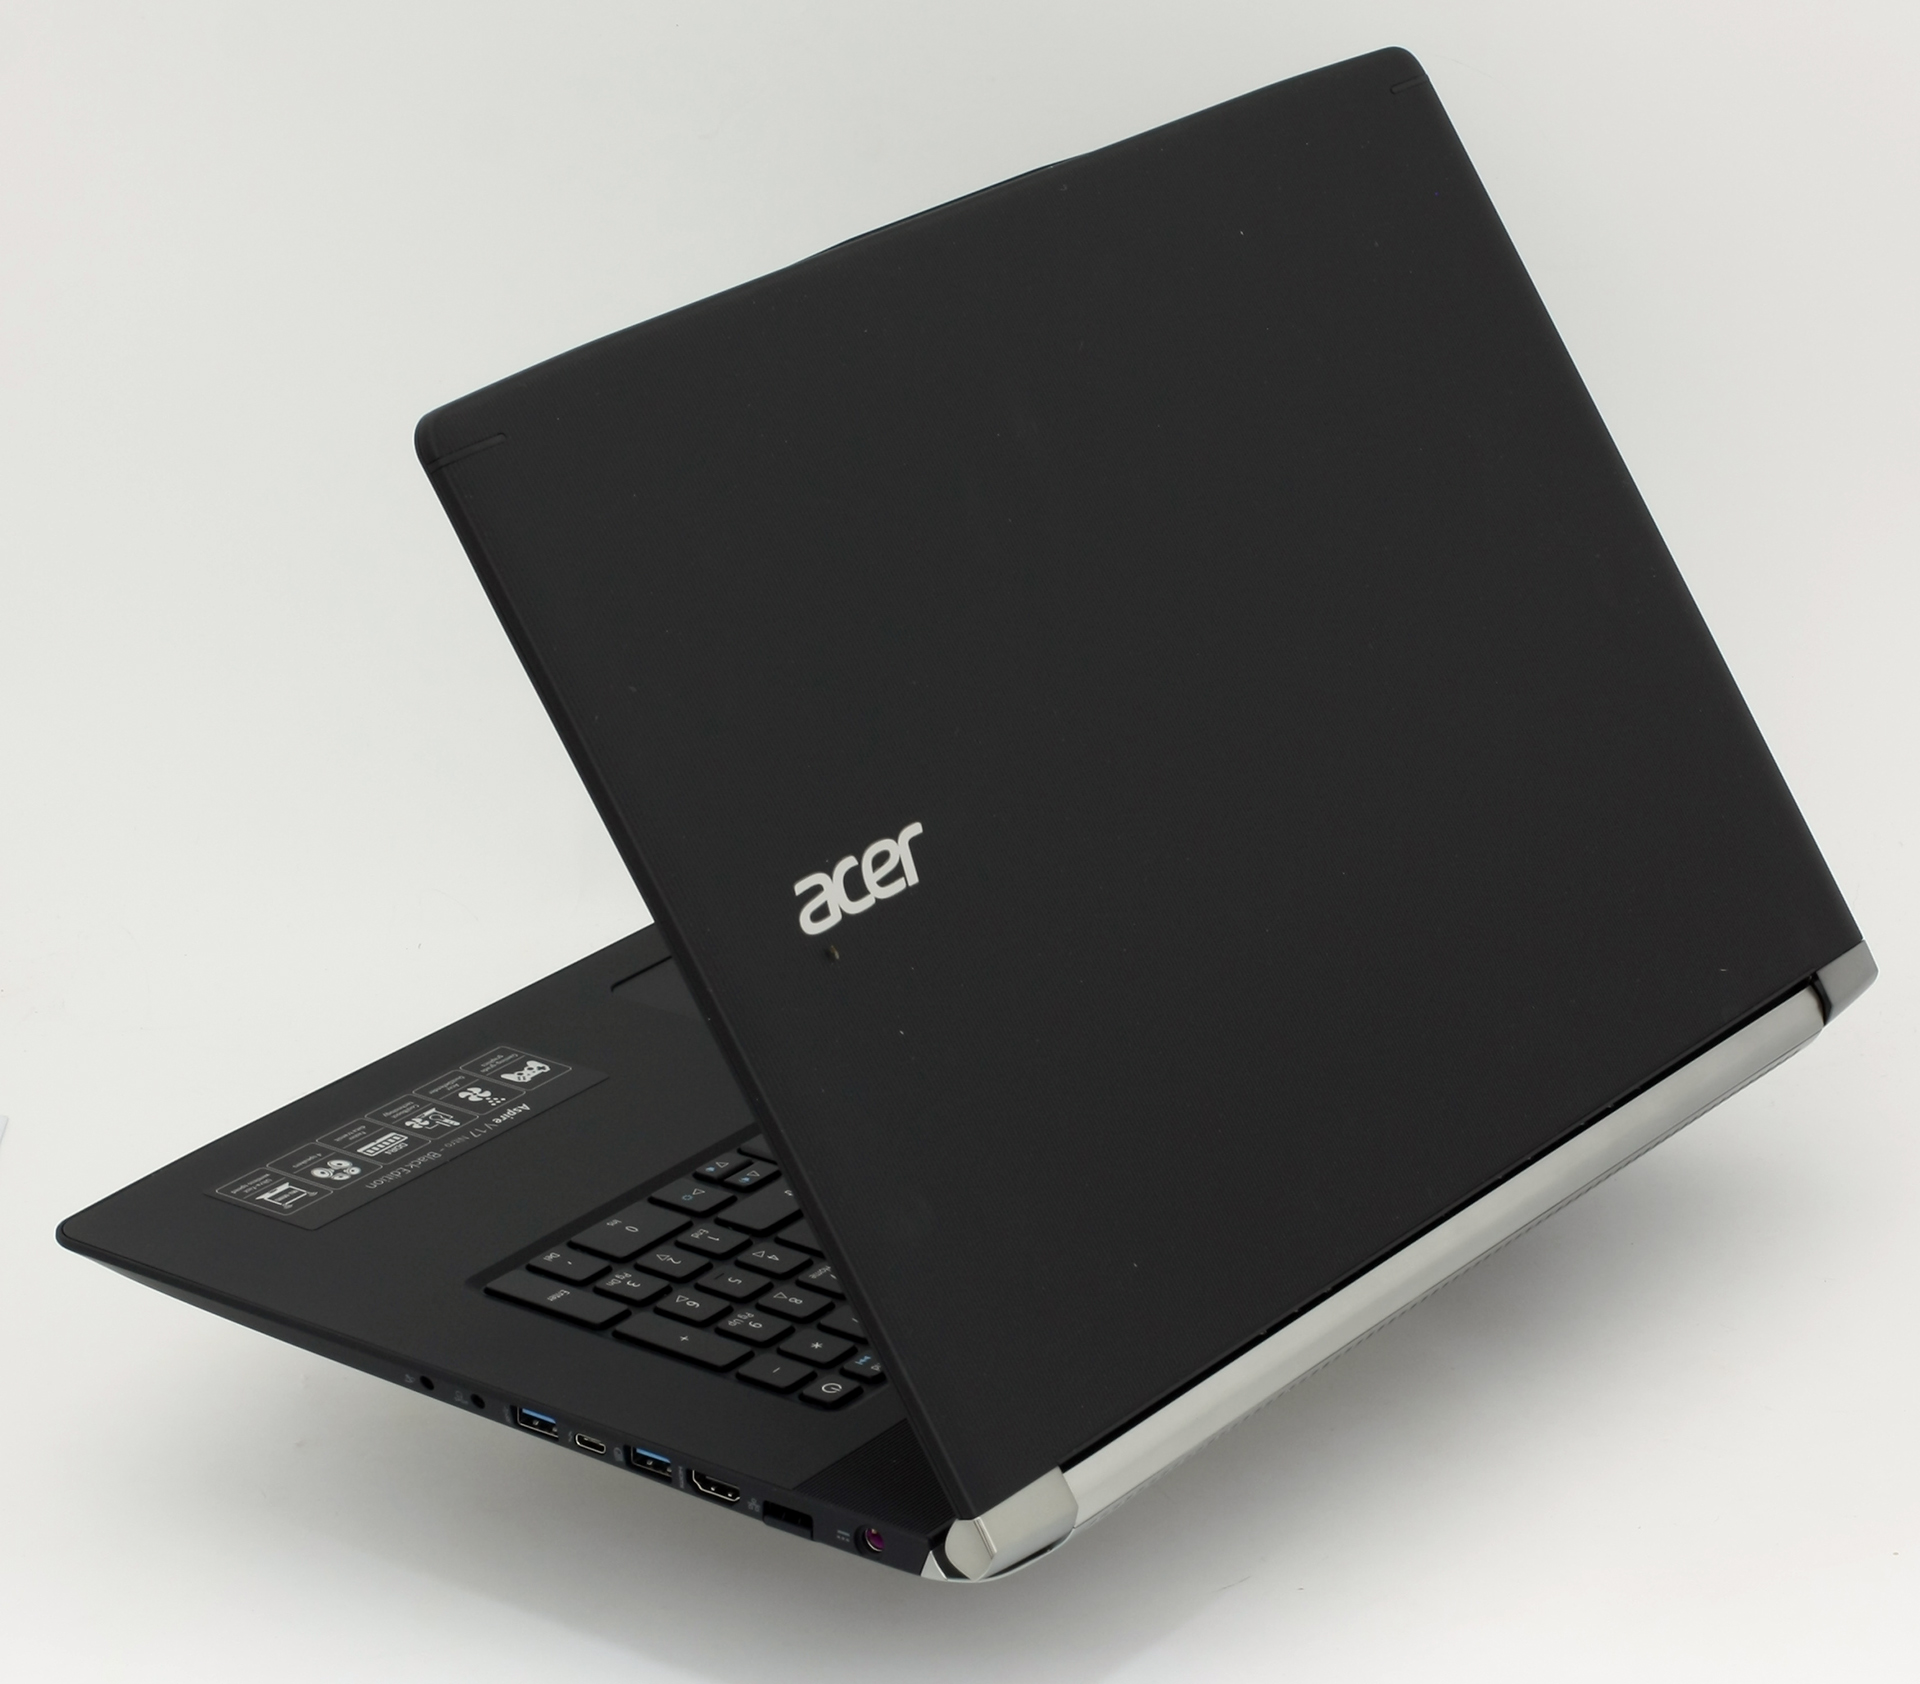 bad Muf vorst Acer Aspire V17 Nitro Black Edition (VN7-792G) review - a compelling 17-inch  gaming solution that's worth considering over the 15-inch version |  LaptopMedia.com